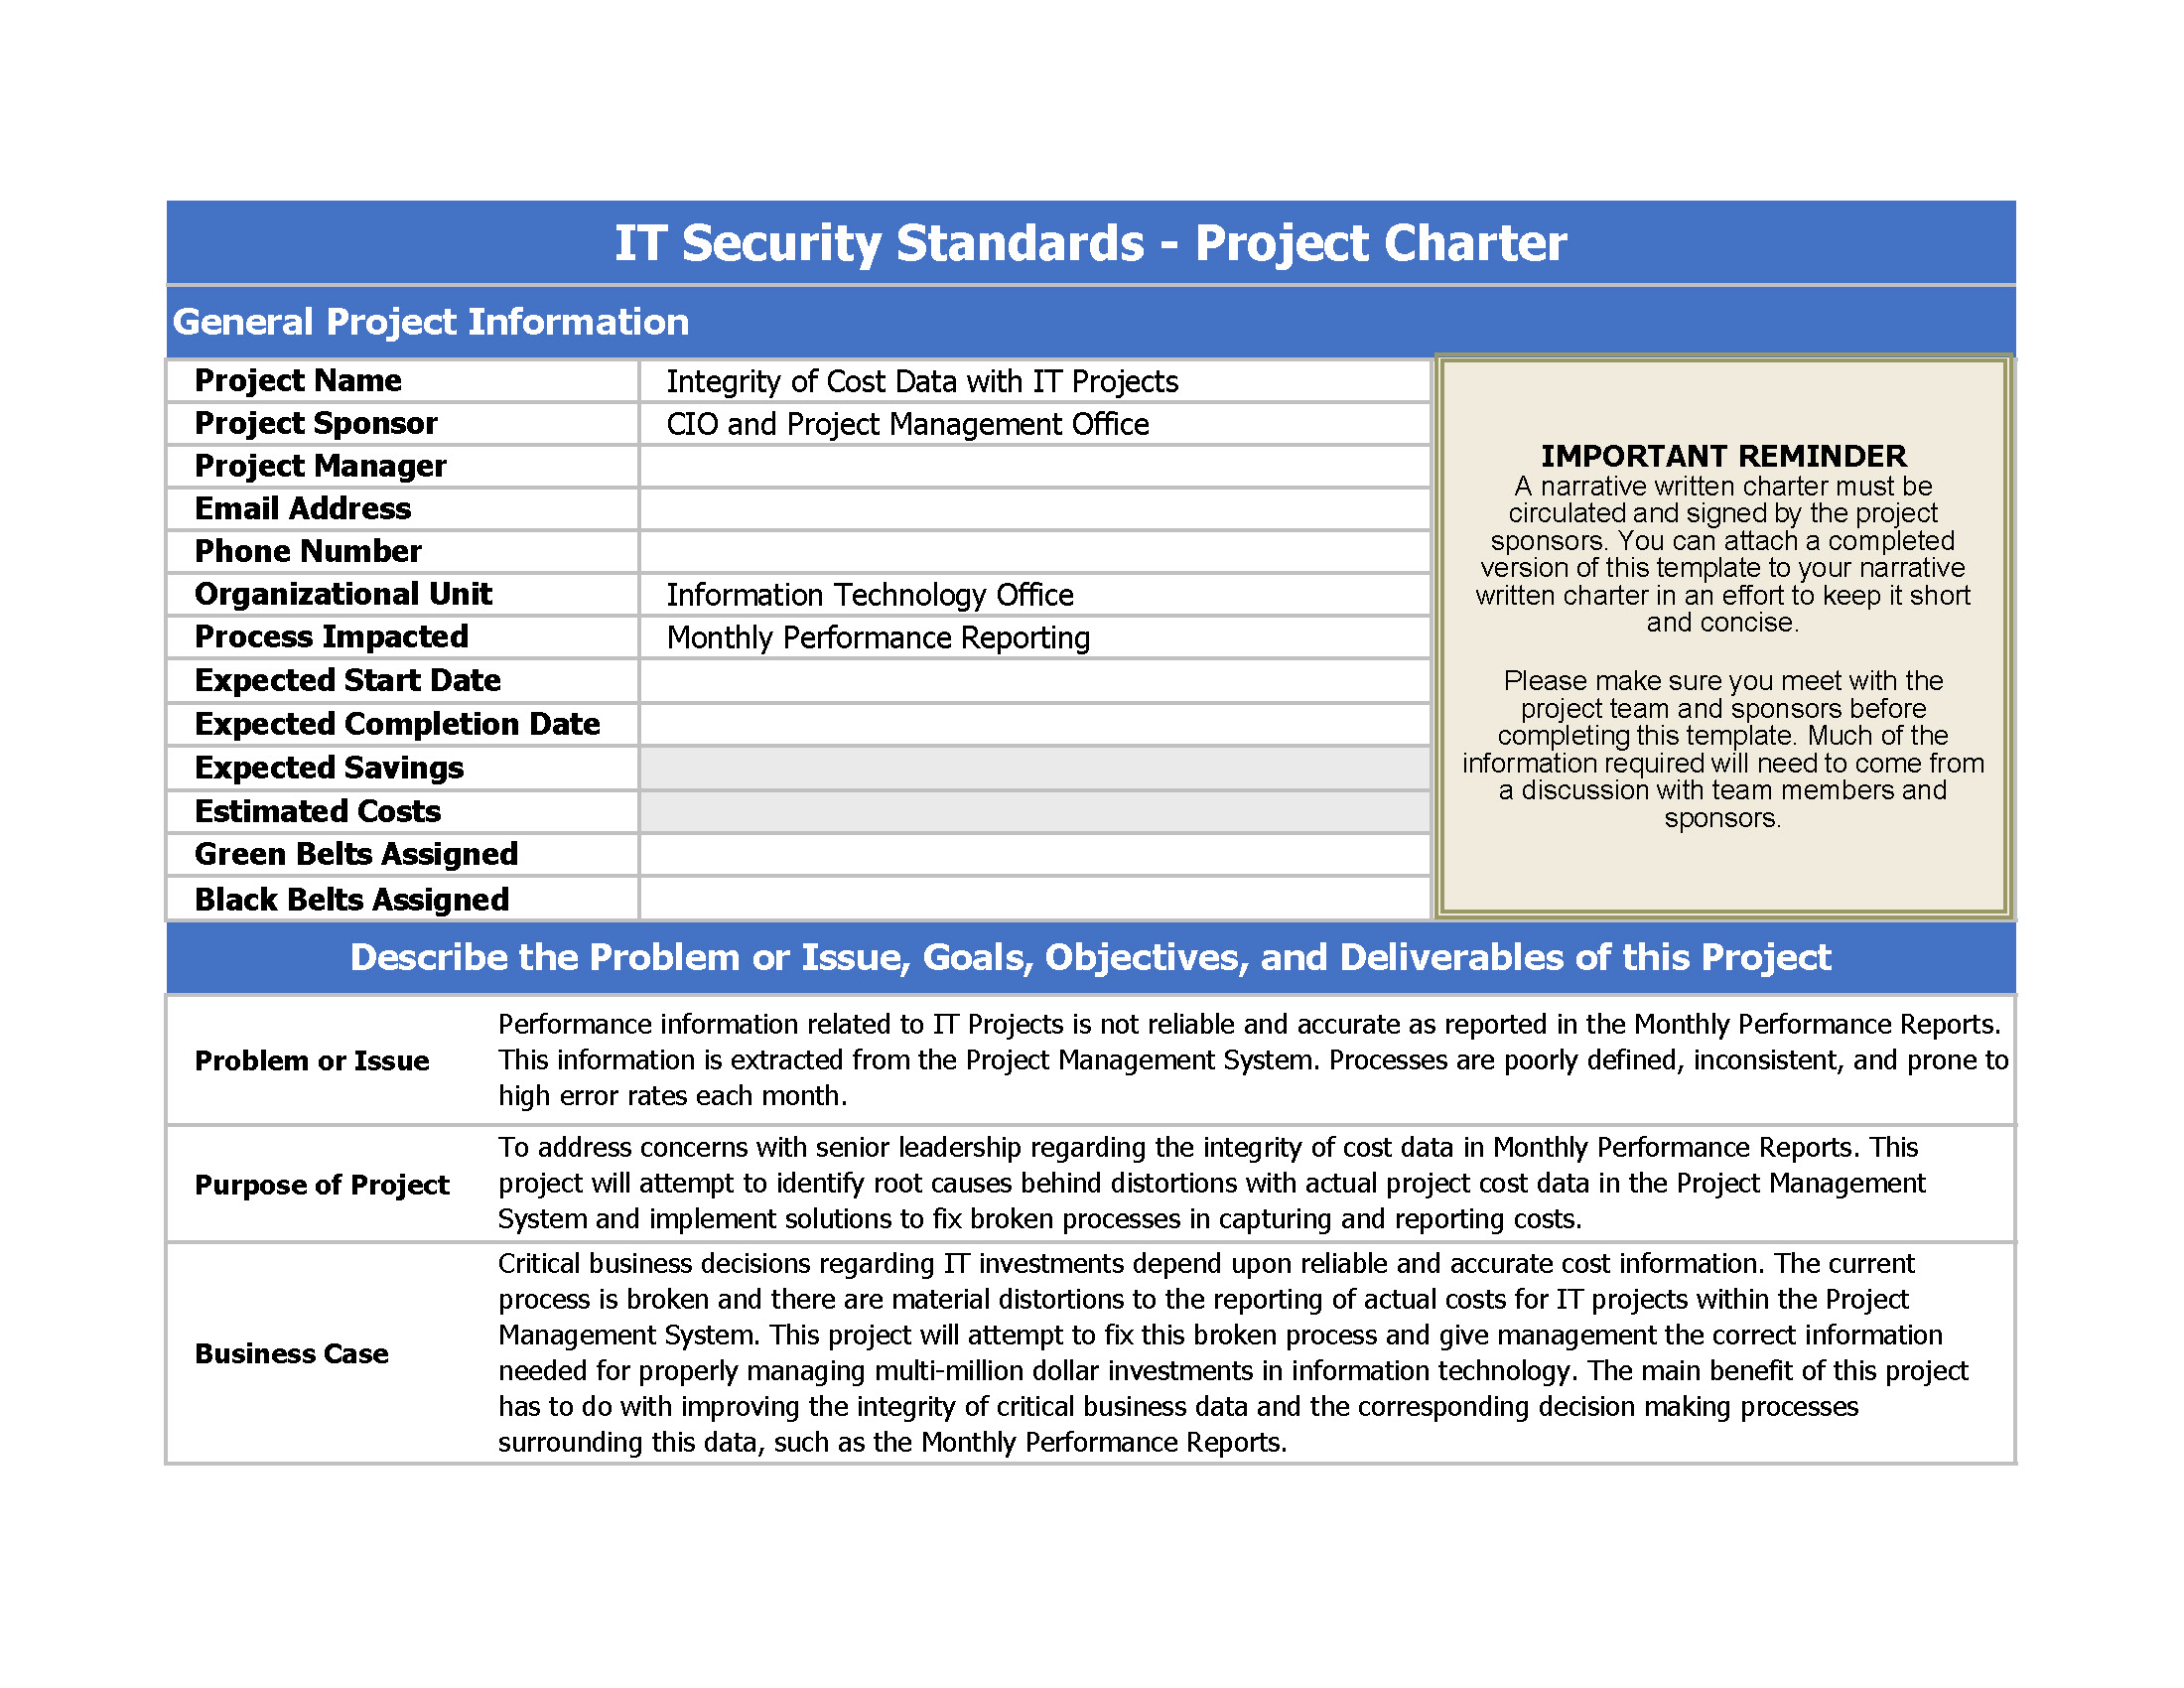 IT Security Compliance Project Charter 模板